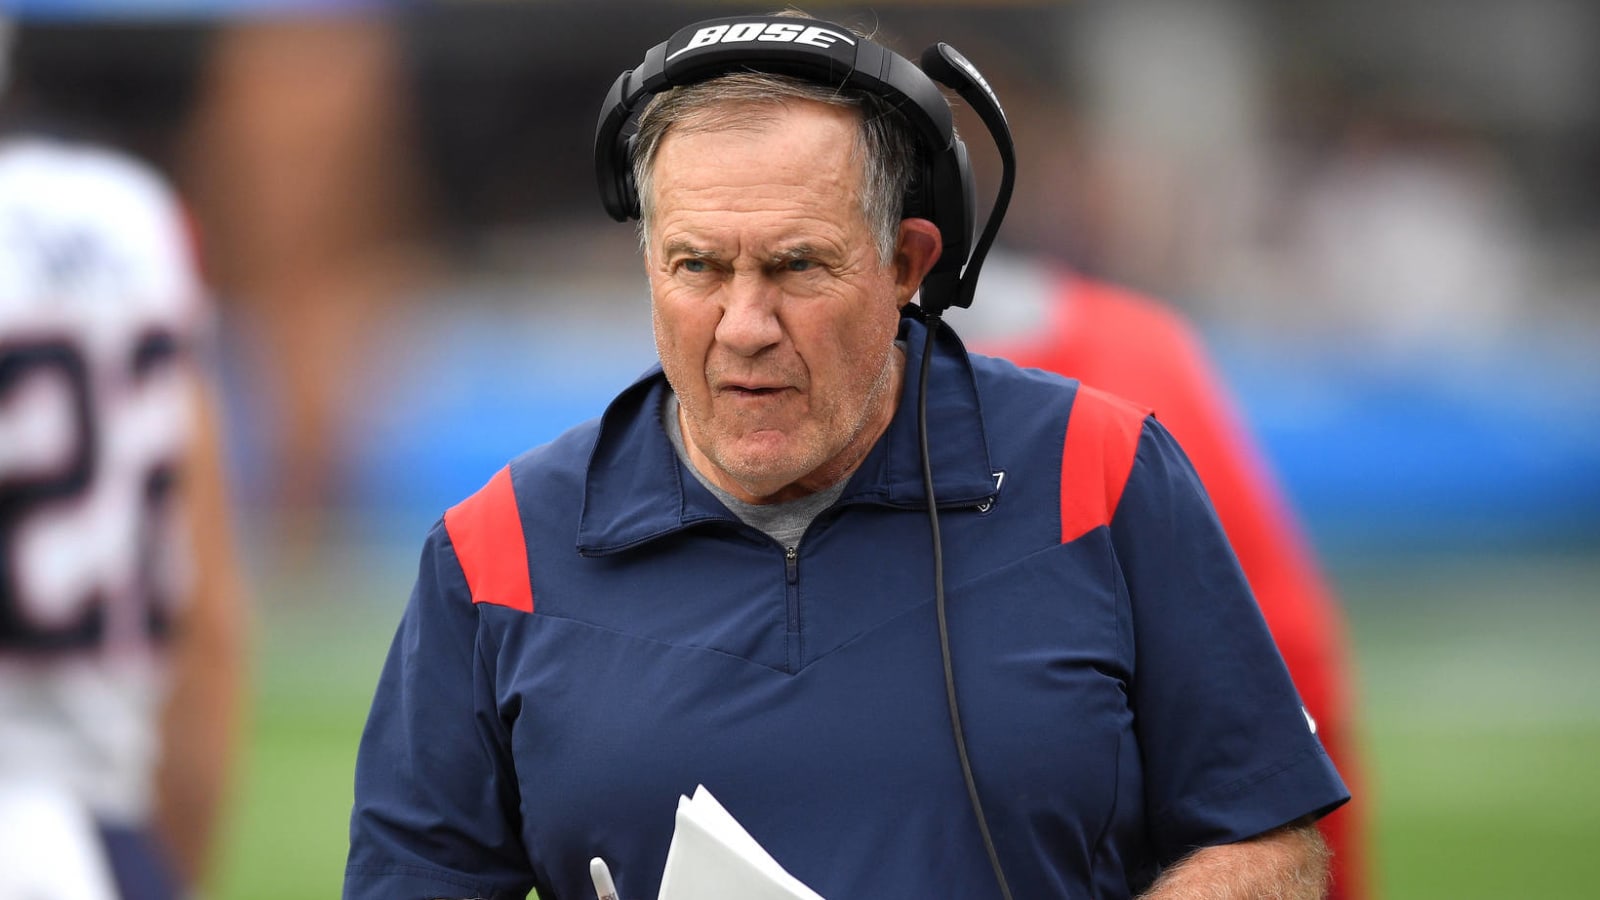 Belichick delivered emphatic quote to team after beating Bills